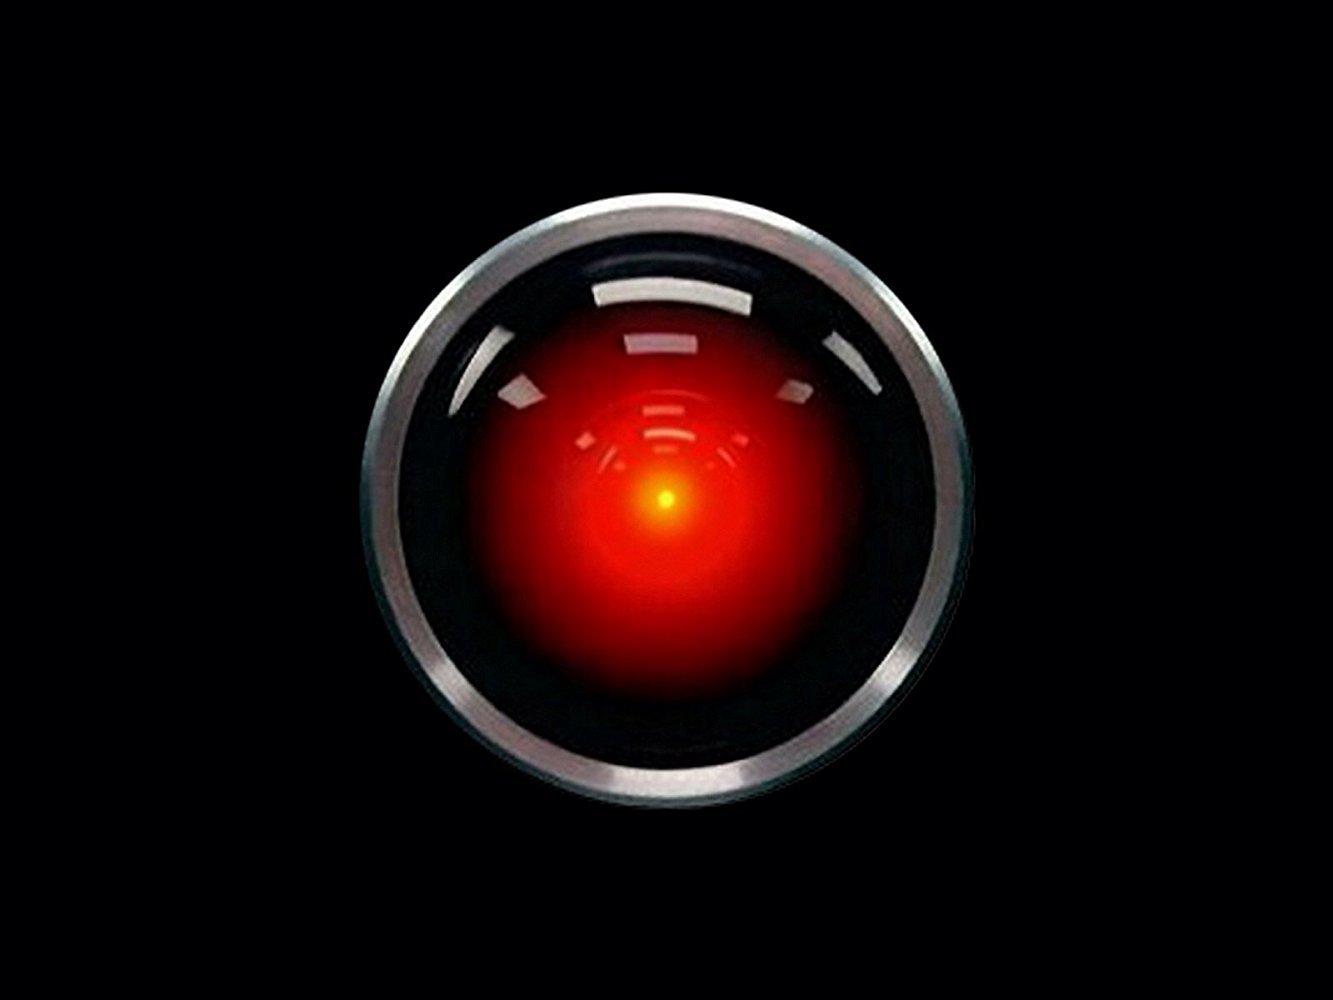 close-up picture of the camera of HAL from 2001: A Space Odyssey - a circle of silver with a red light inside it